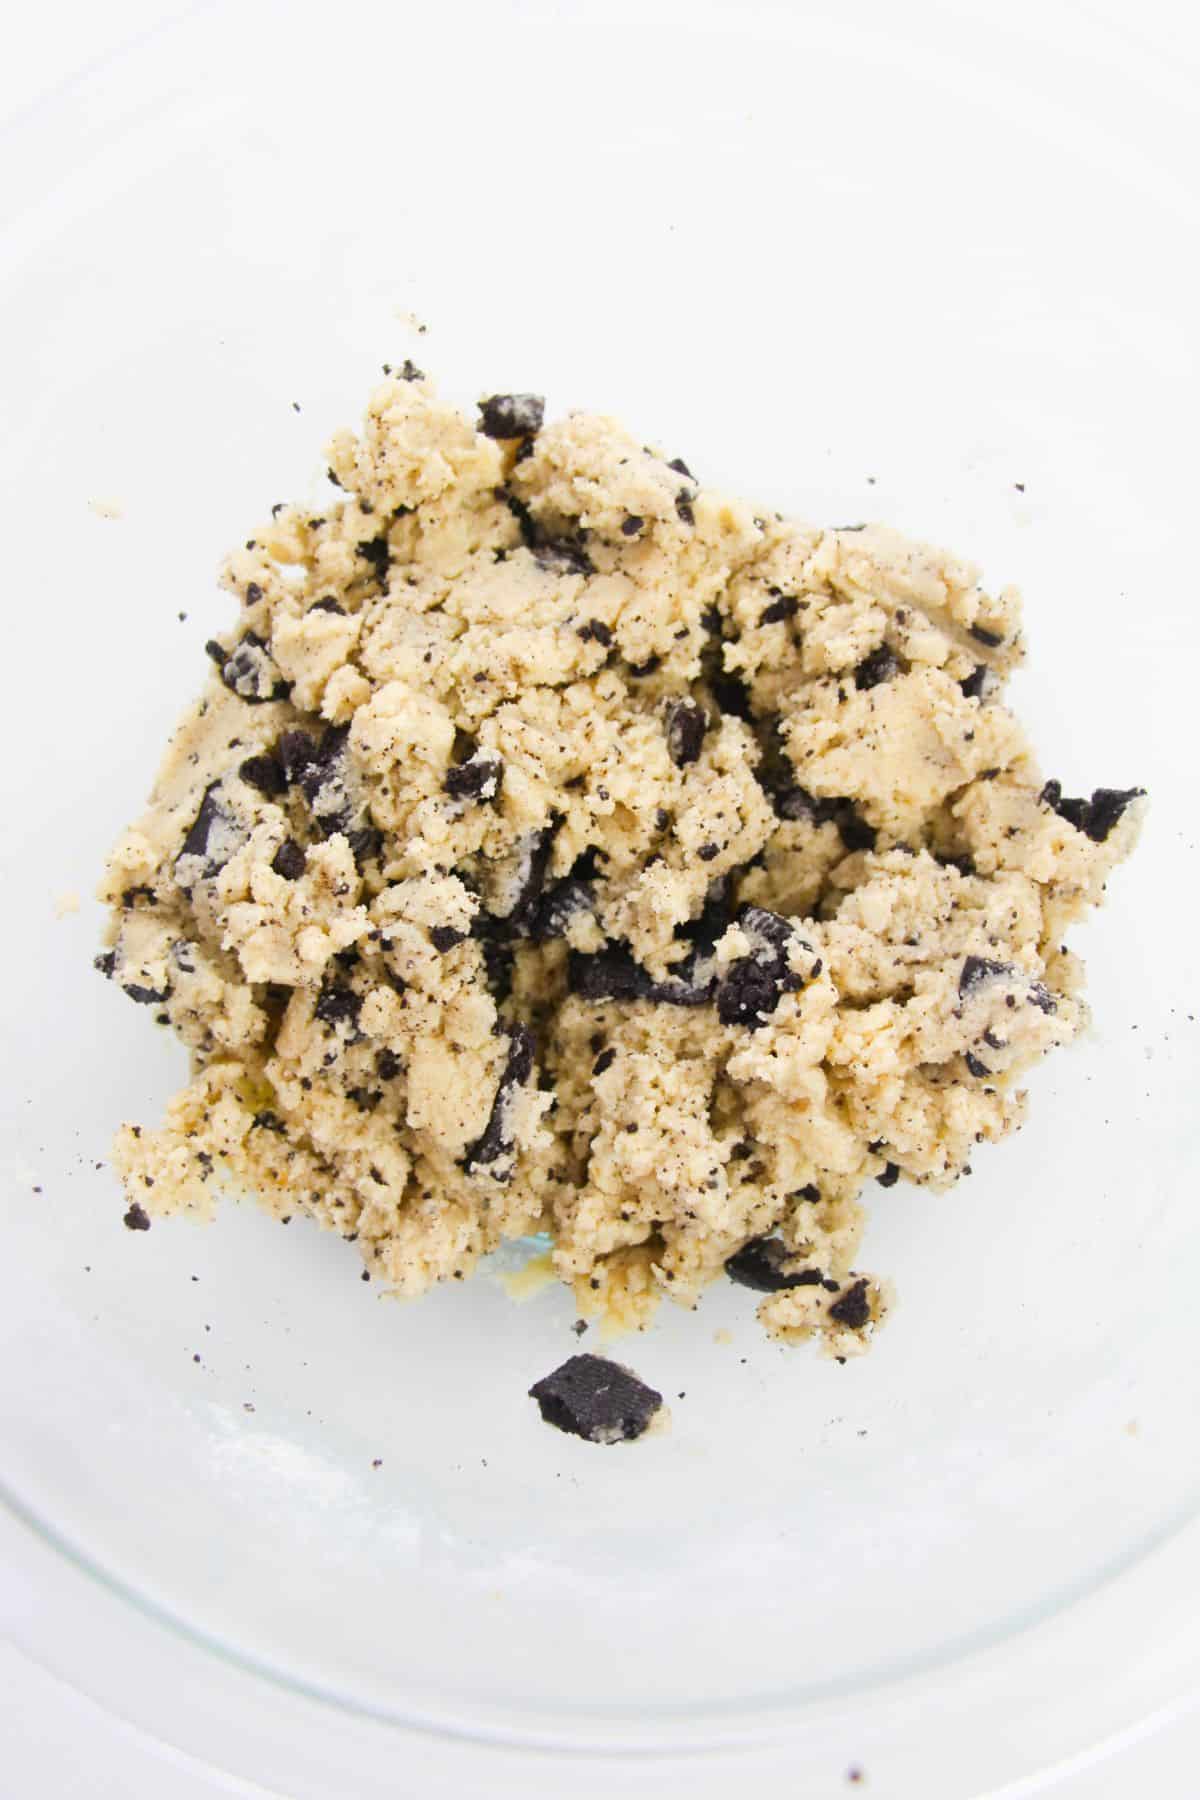 Crumble the OREO cookies into the dough.